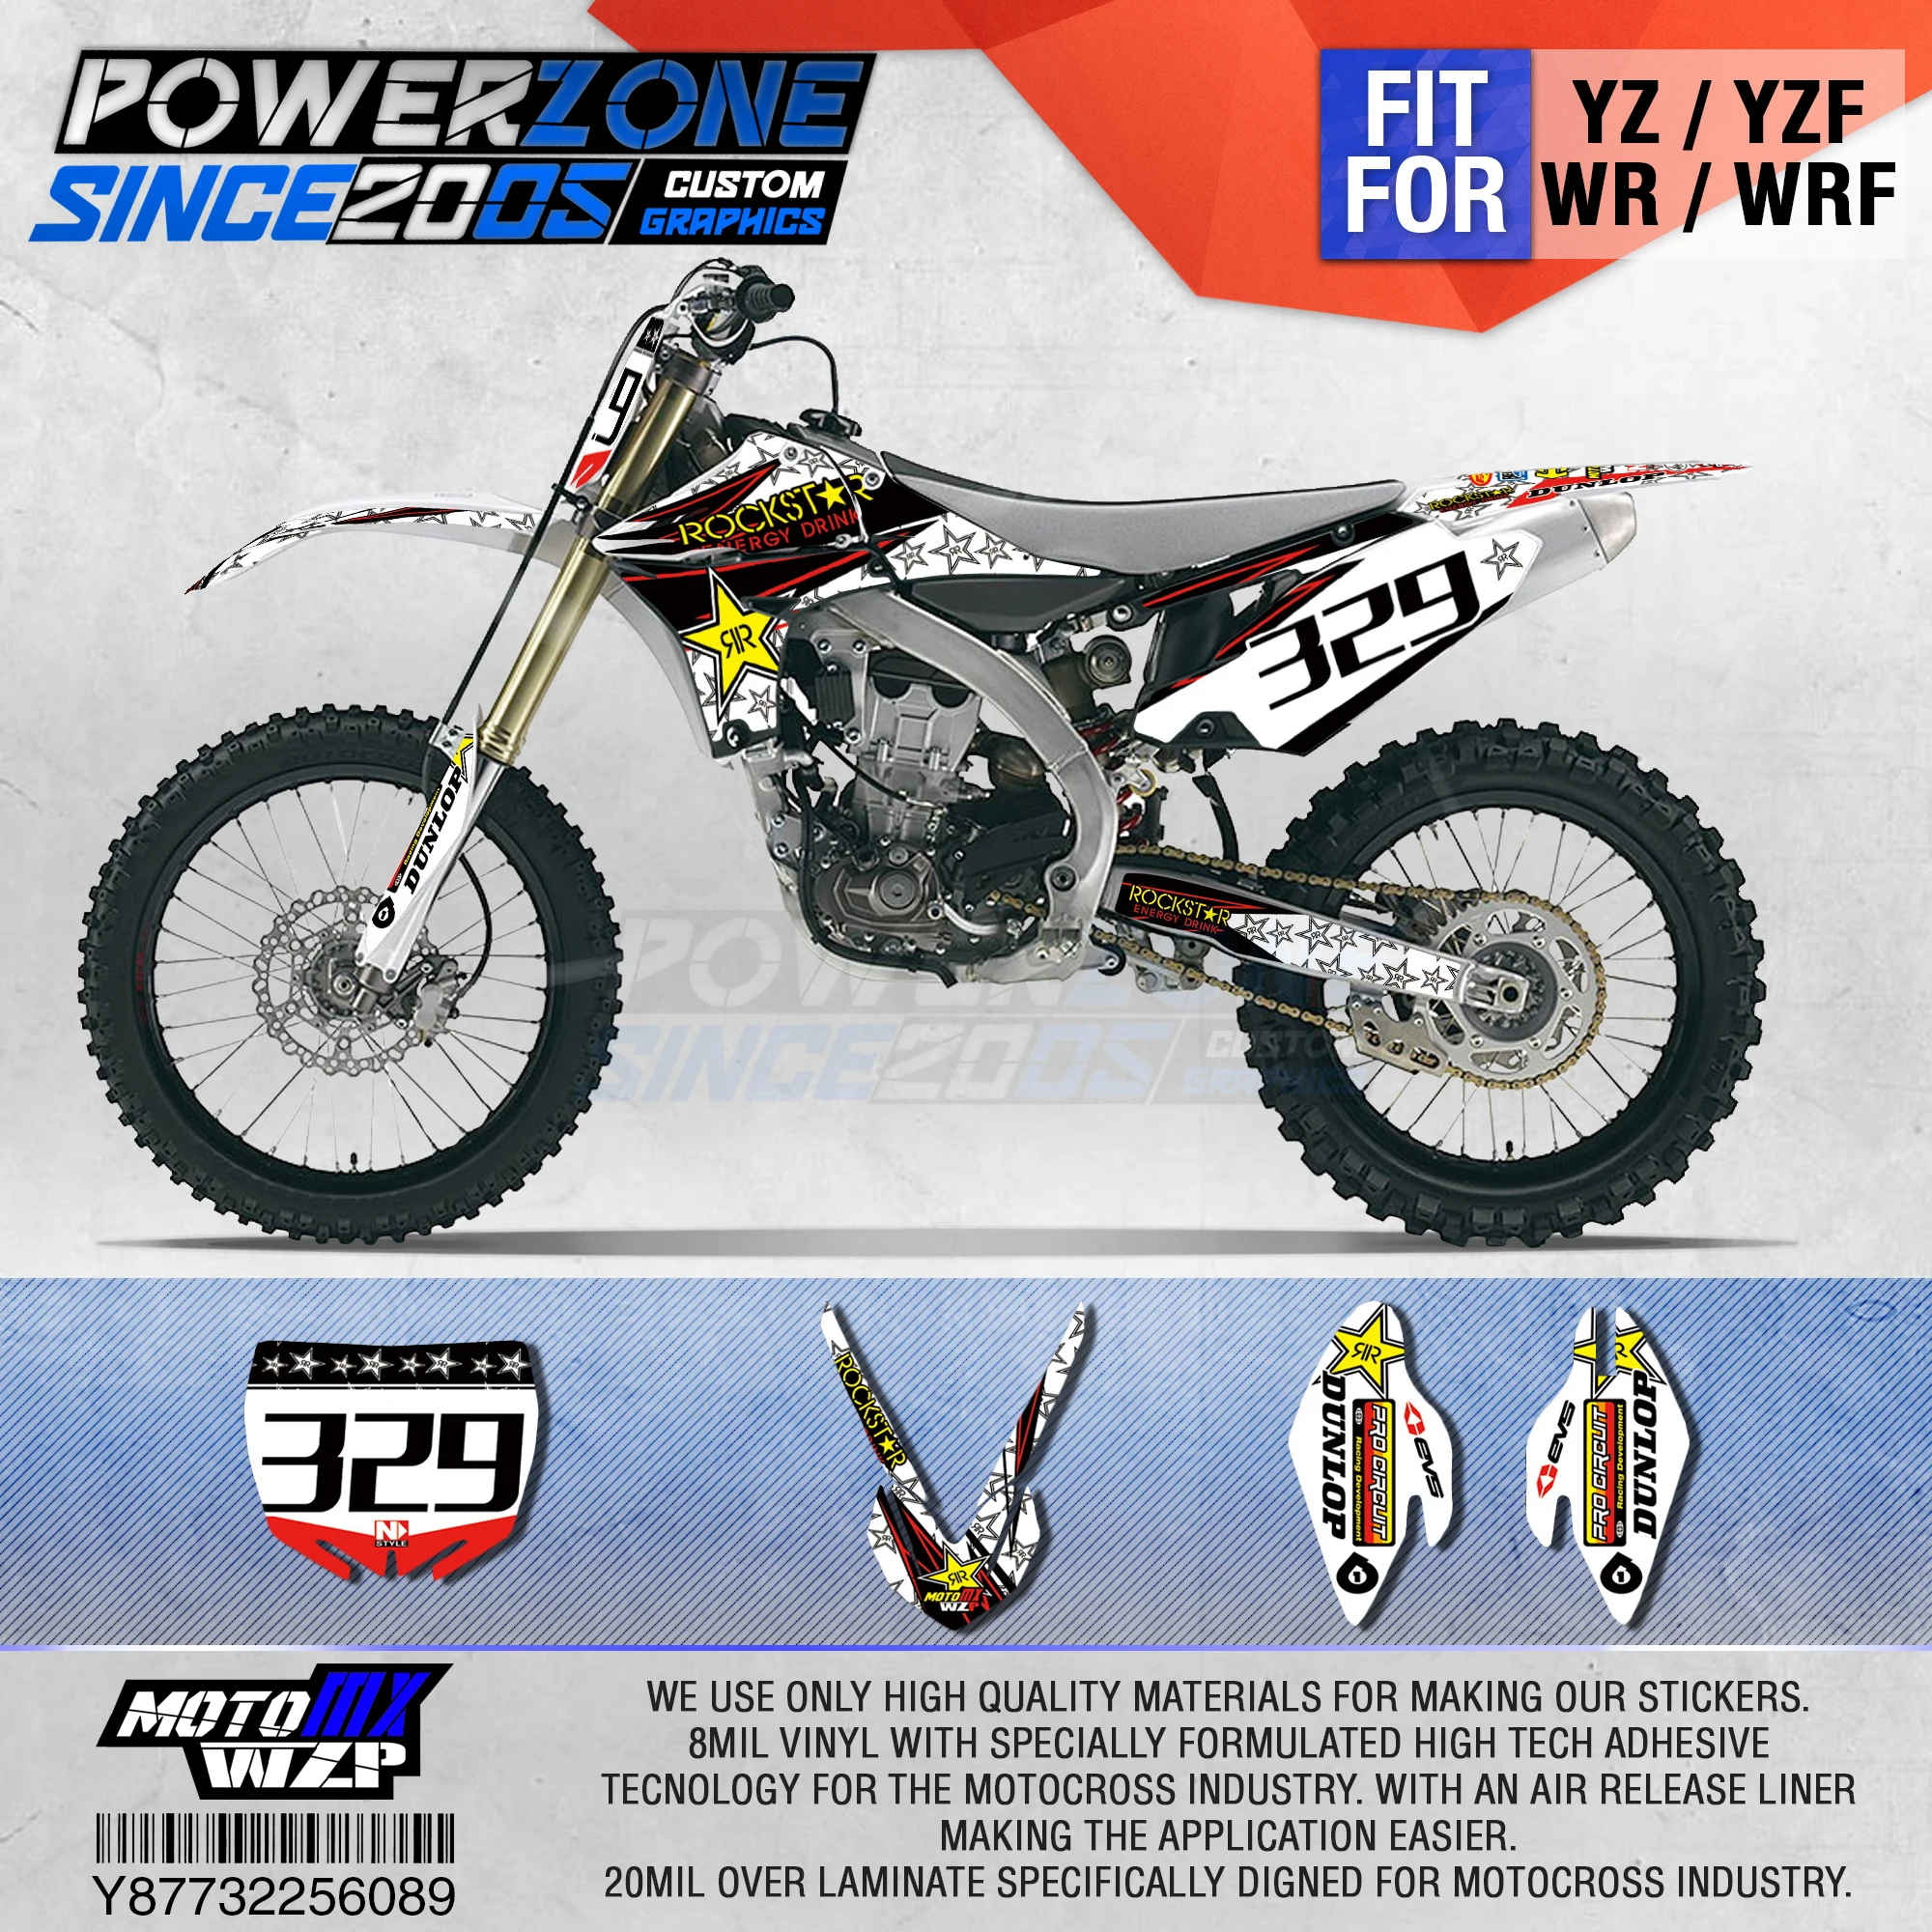 

PowerZone Customized Team Graphics Backgrounds Decals 3M Custom Stickers For YAMAHA YZF450 YZ YZF WR WRF 2010 2011 2012 2013 089